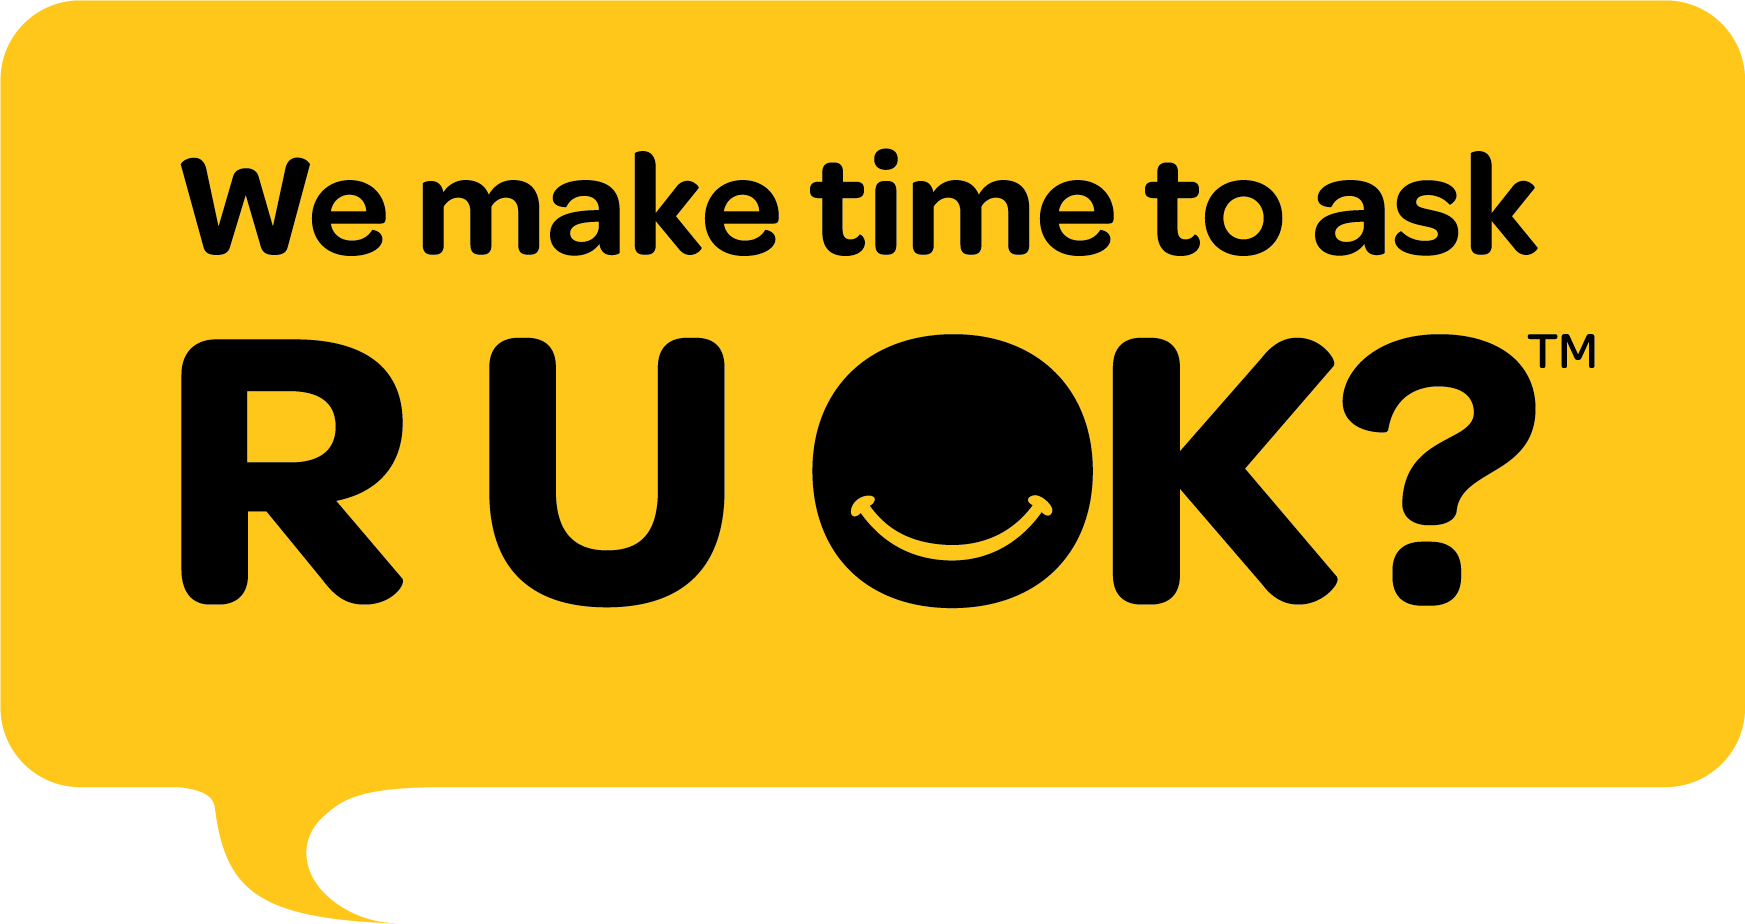 Make time to ask are you ok